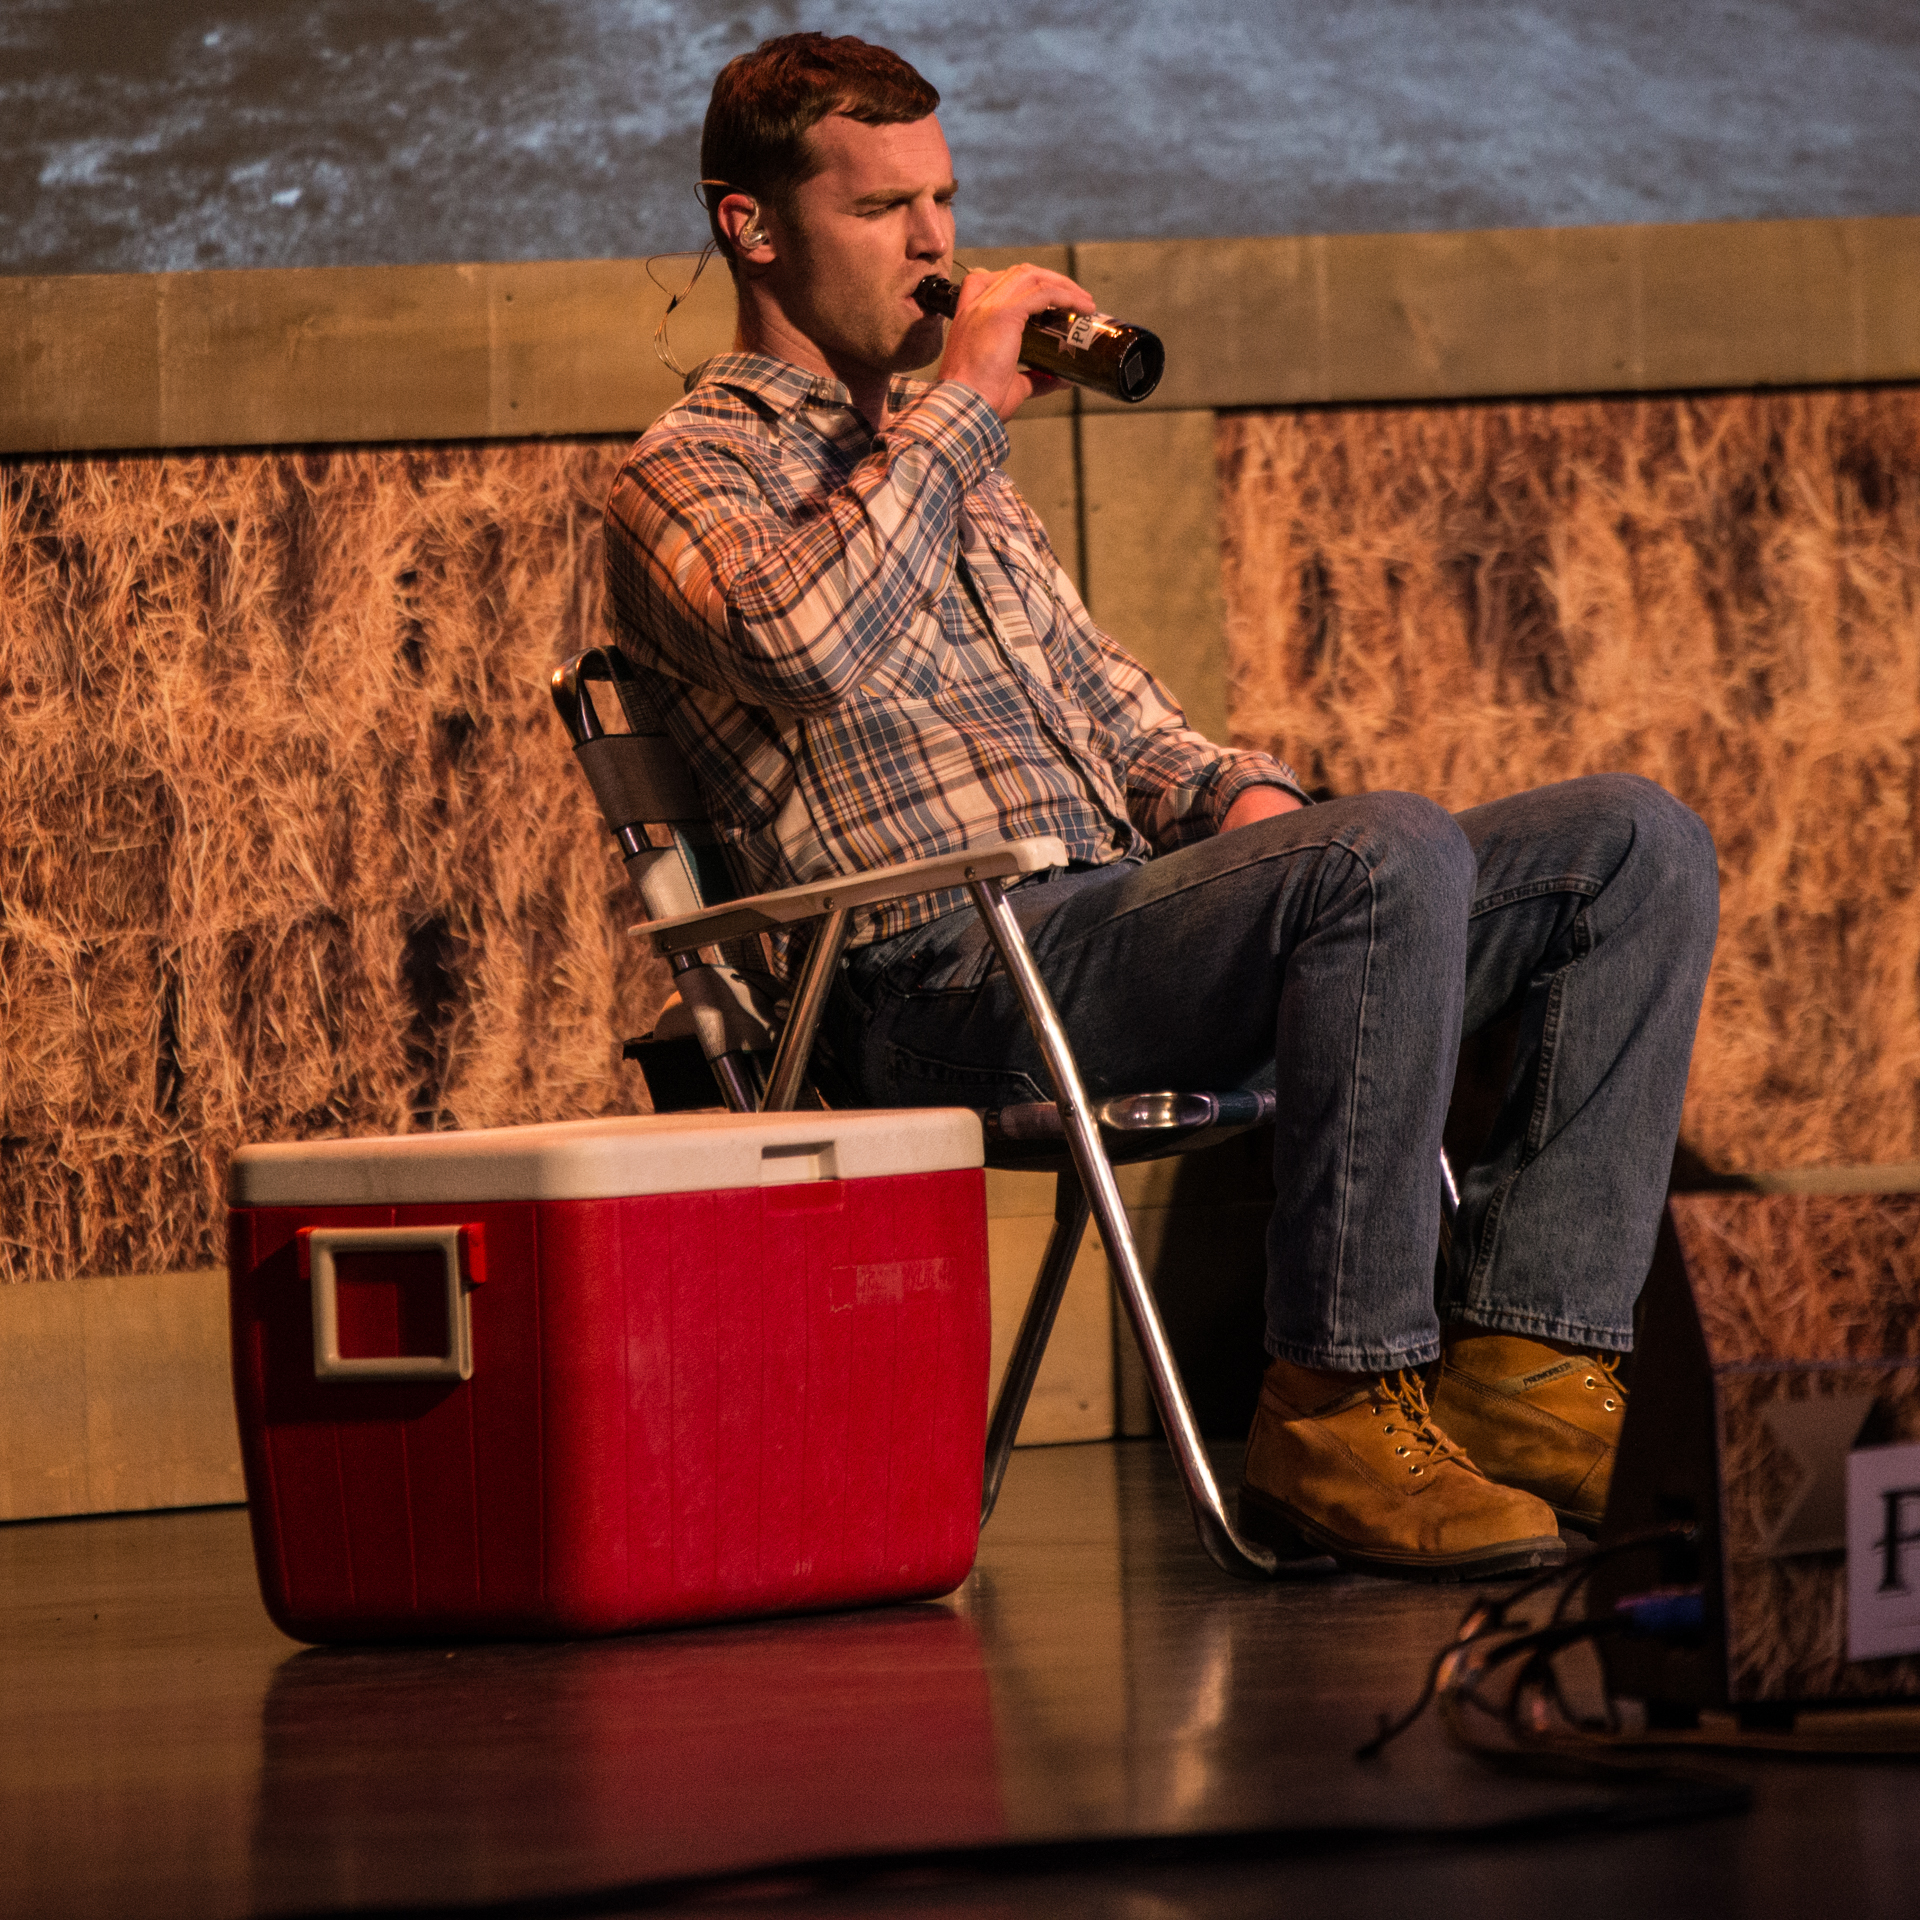 Jared Keeso sits comfortably on stage, donned in a blue and white plaid shirt and blue jeans, taking a sip of Puppers beer. Beside him, a red cooler adds a touch of character. The backdrop of hay completes the rustic and inviting atmosphere, setting the stage for a unique and enjoyable performance.